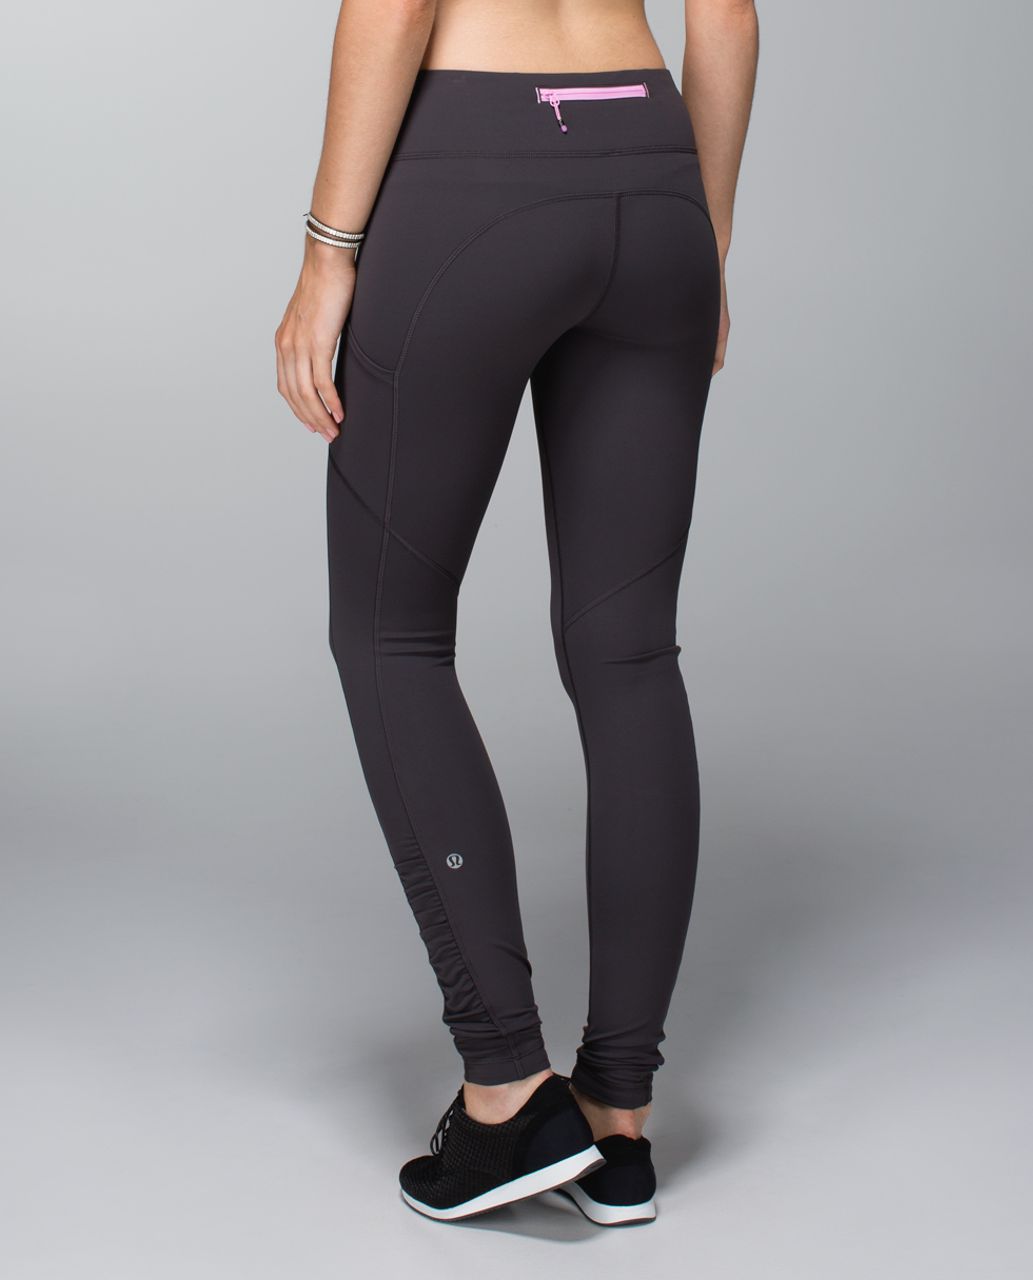 Lululemon Speed Tight II *Full-On Luxtreme Stained Glass Love